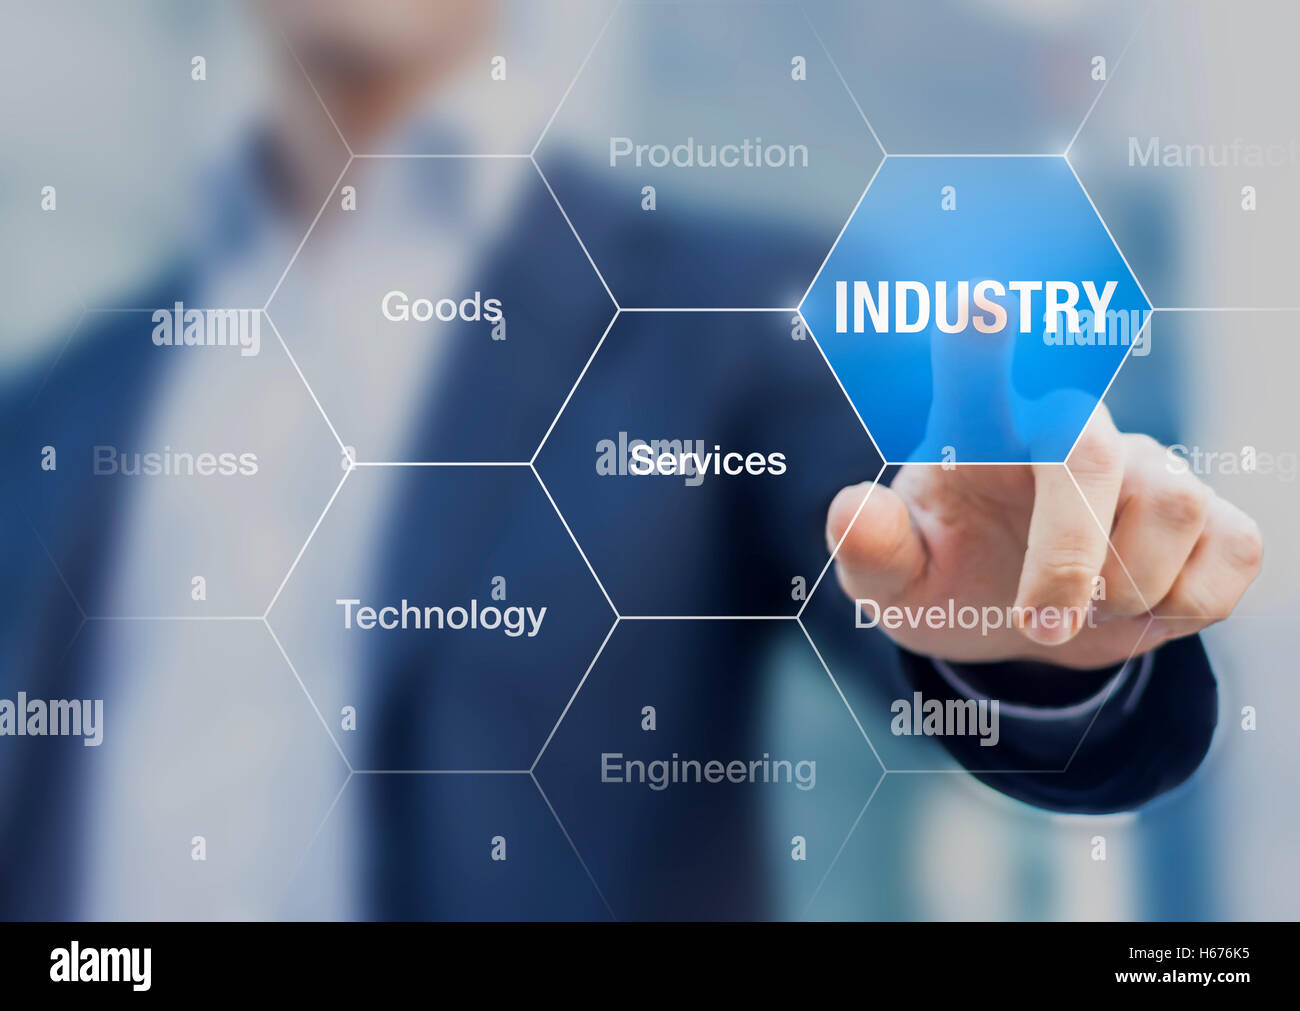 Concept about industry, production of goods and services with businessman in background Stock Photo